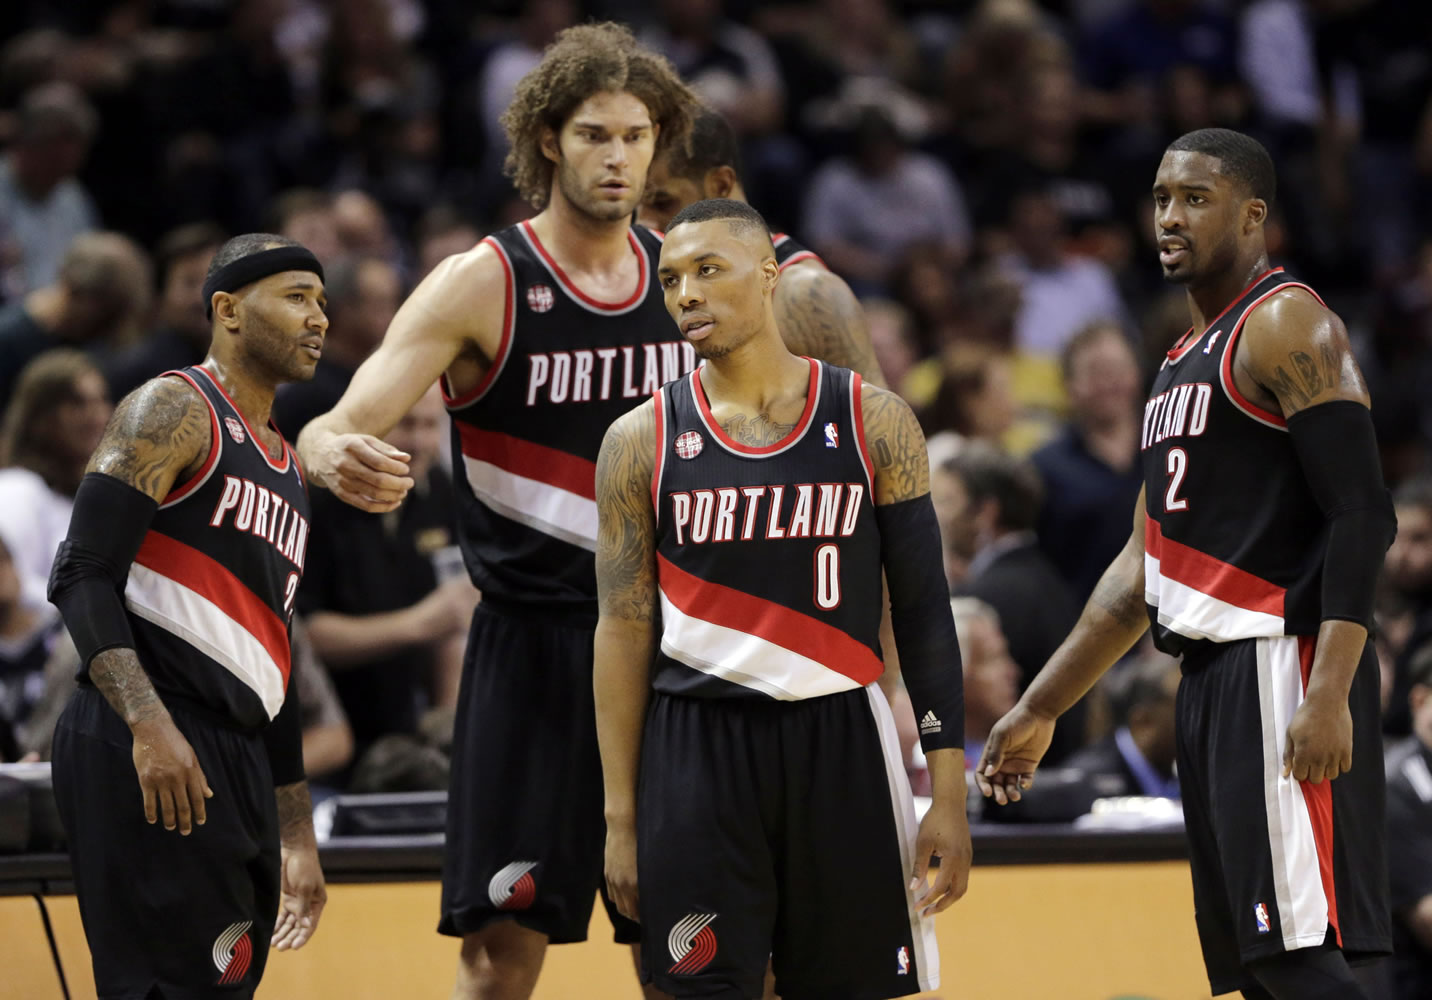 Portland Trail Blazers' Damian Lillard (0) and teammates wait to enter the game following a timeout during the first half of Game 1 of a Western Conference semifinal NBA basketball playoff series against the San Antonio Spurs, Tuesday, May 6, 2014, in San Antonio.